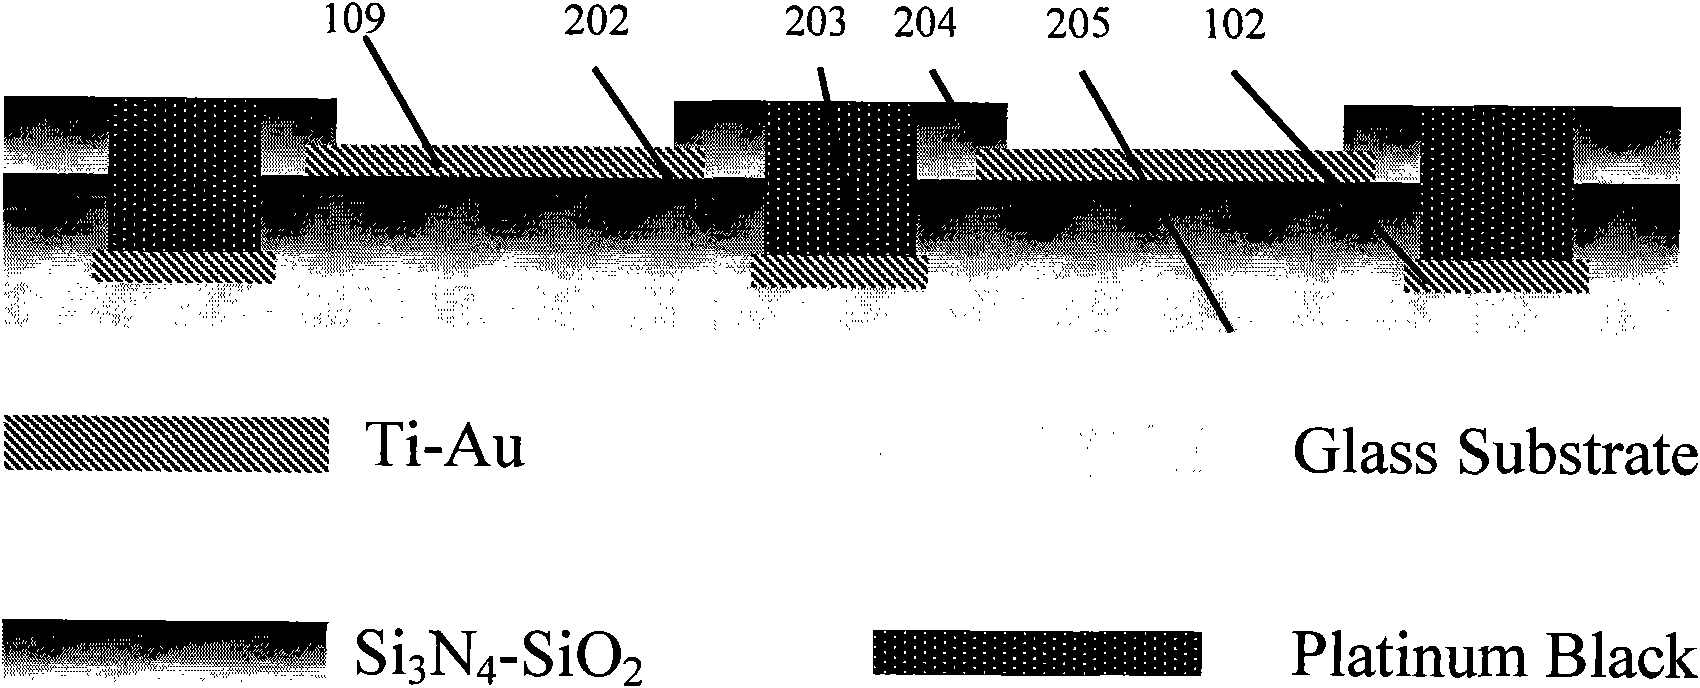 Microelectrode array device and special device for cell manipulation and electrophysiological signal detection